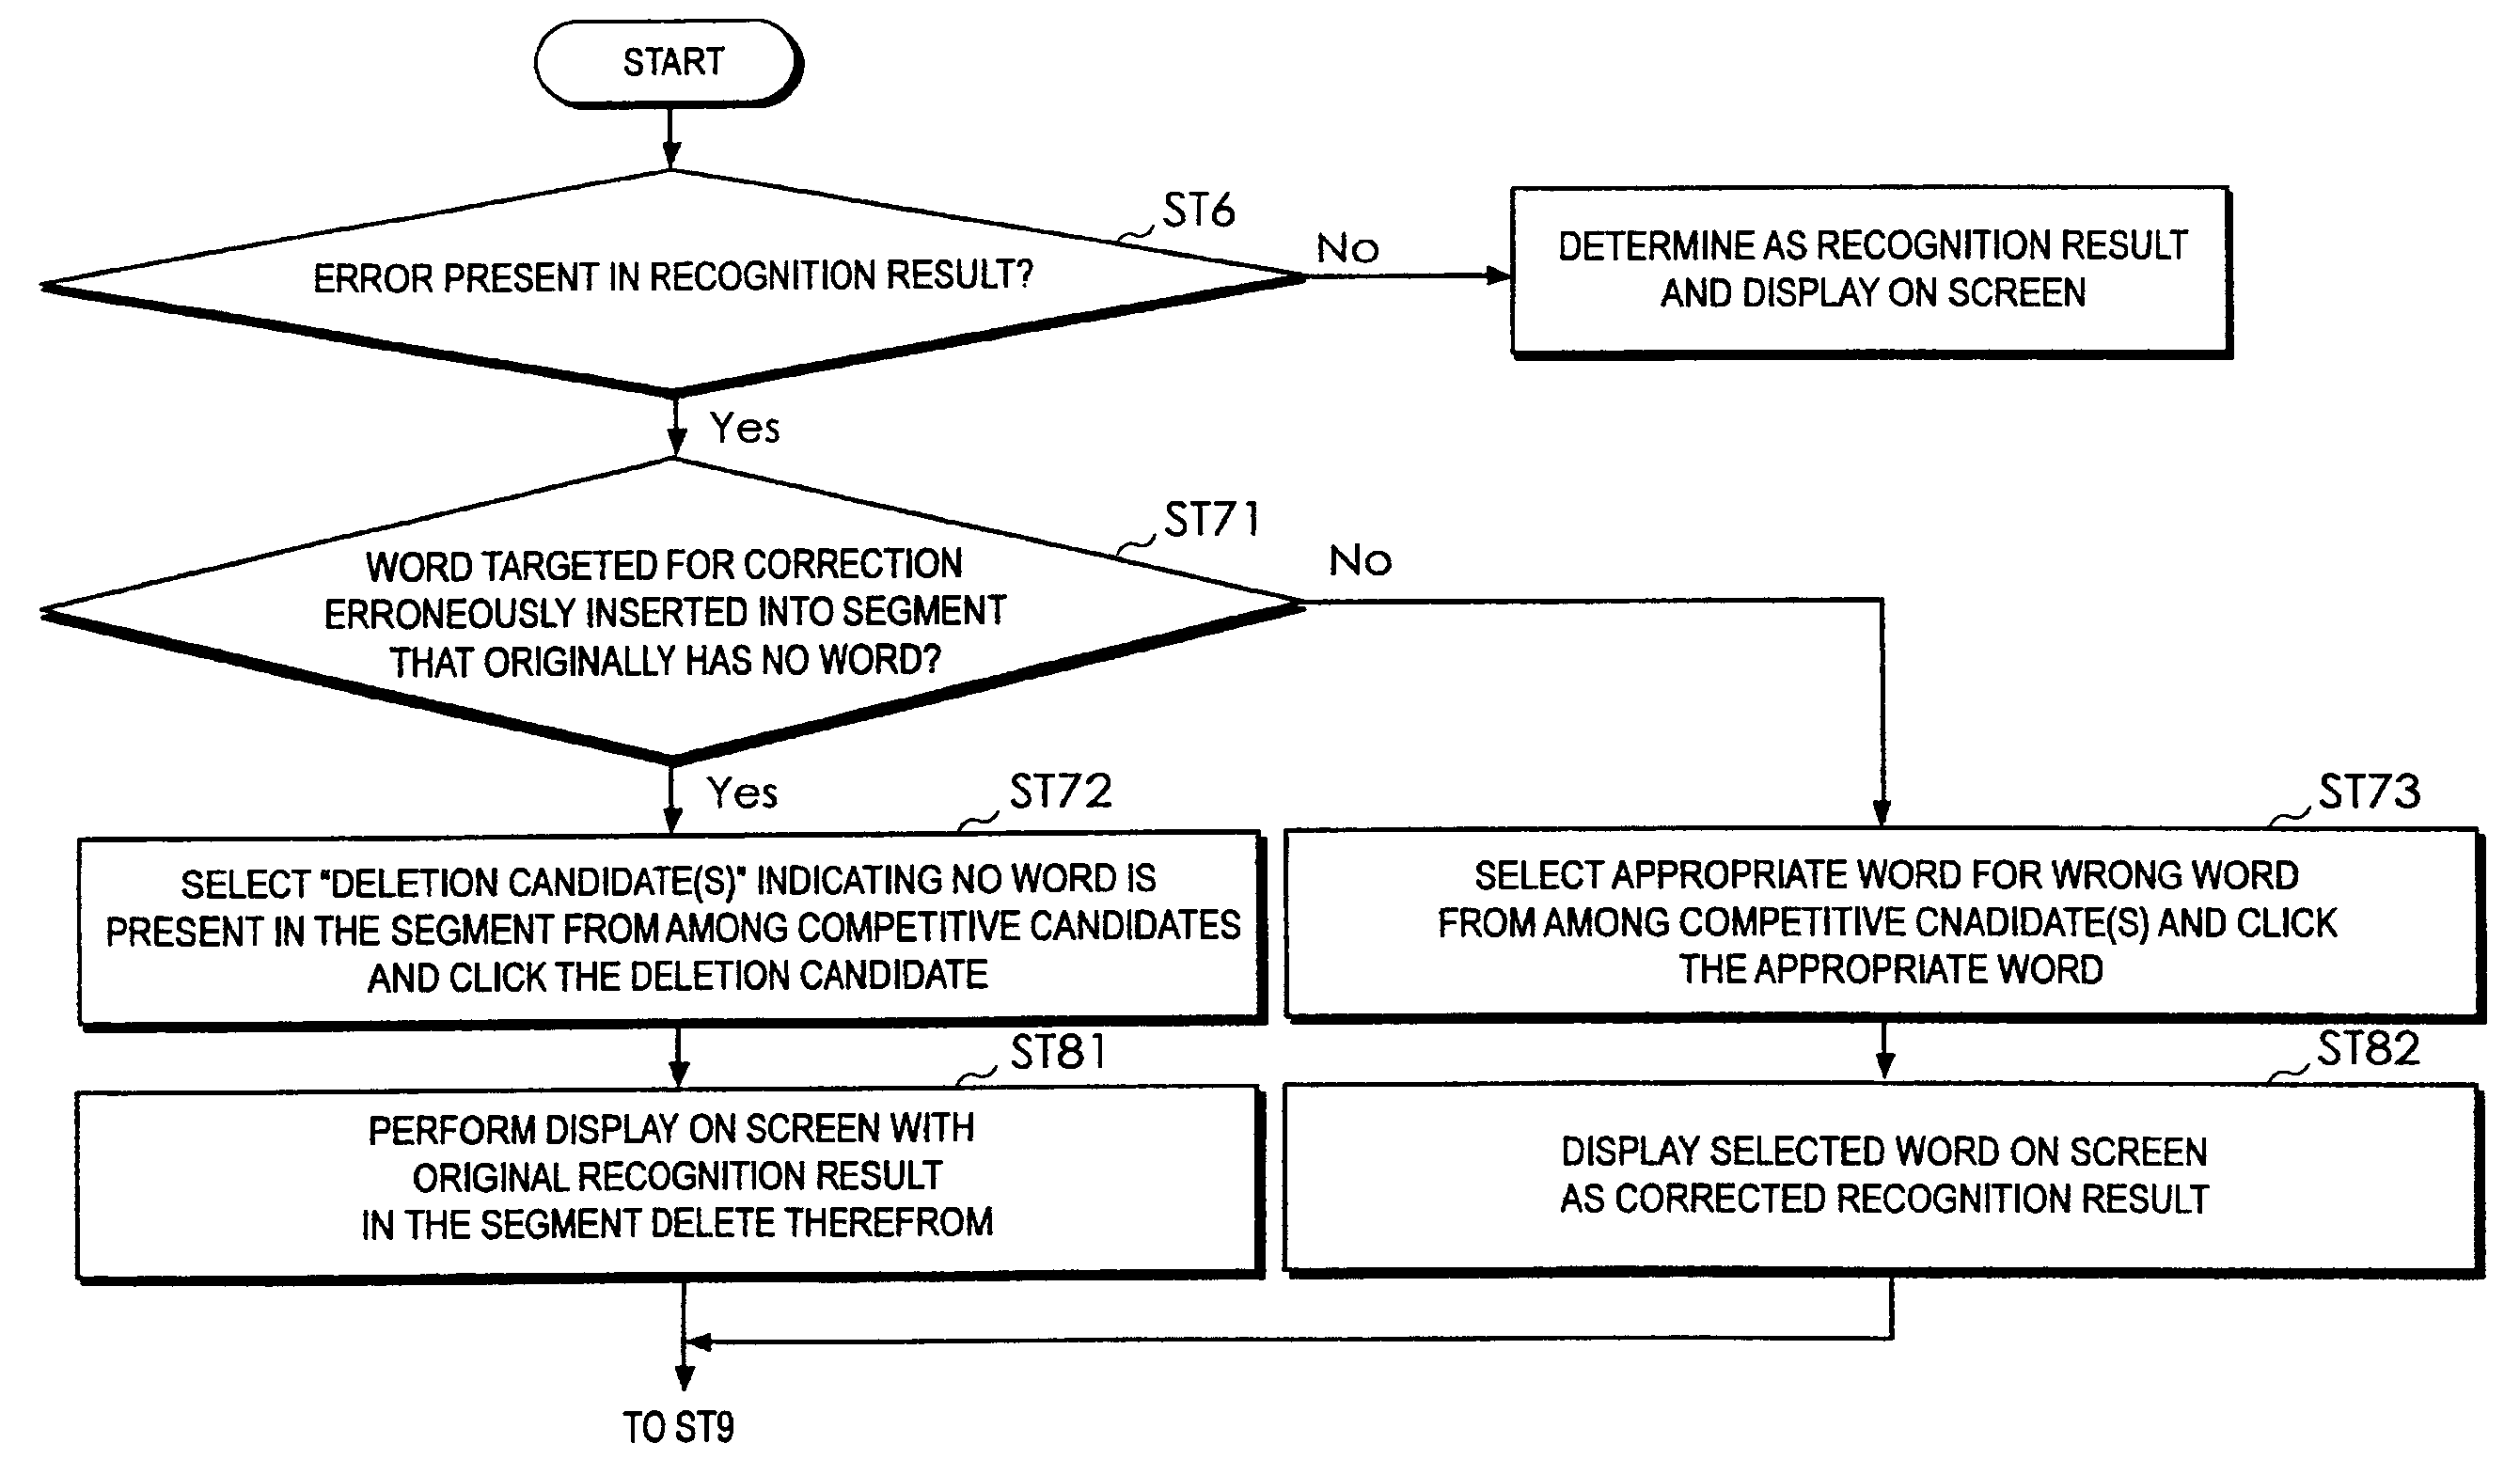 System, method, and program for correcting misrecognized spoken words by selecting appropriate correction word from one or more competitive words